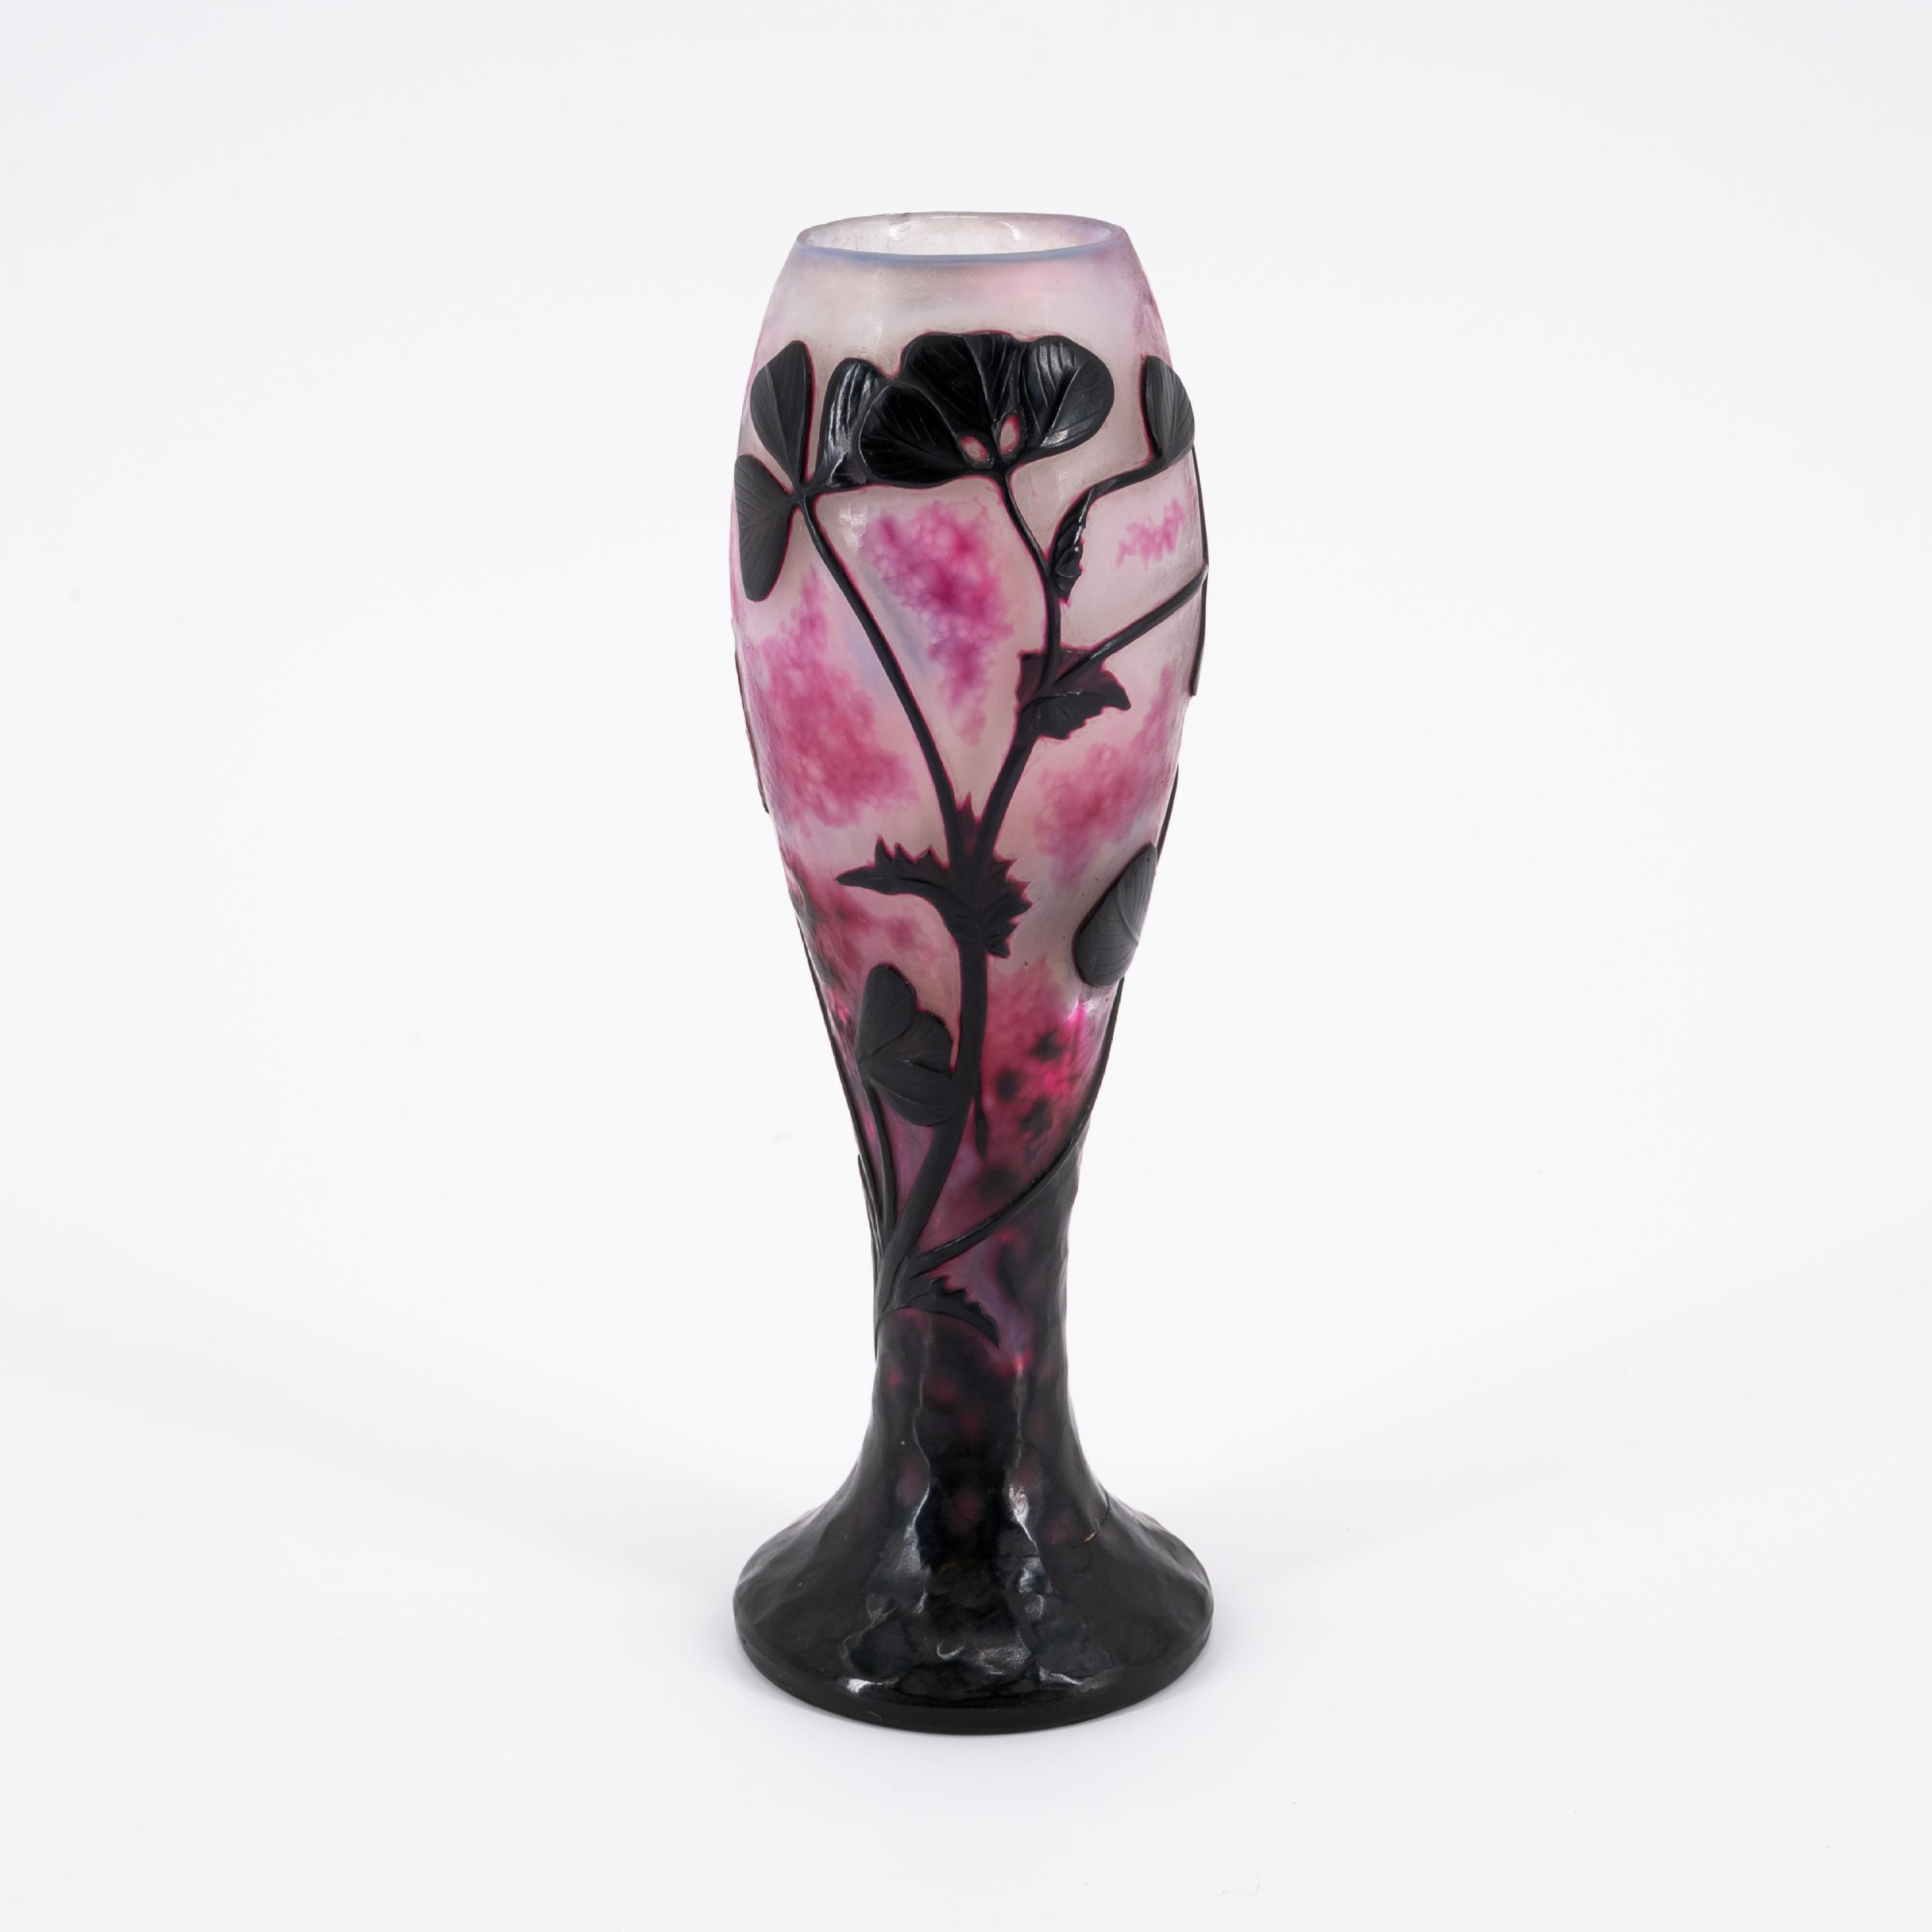 CLUB-SHAPED GLASS VASE WITH GINKO BRANCHES - Image 2 of 6